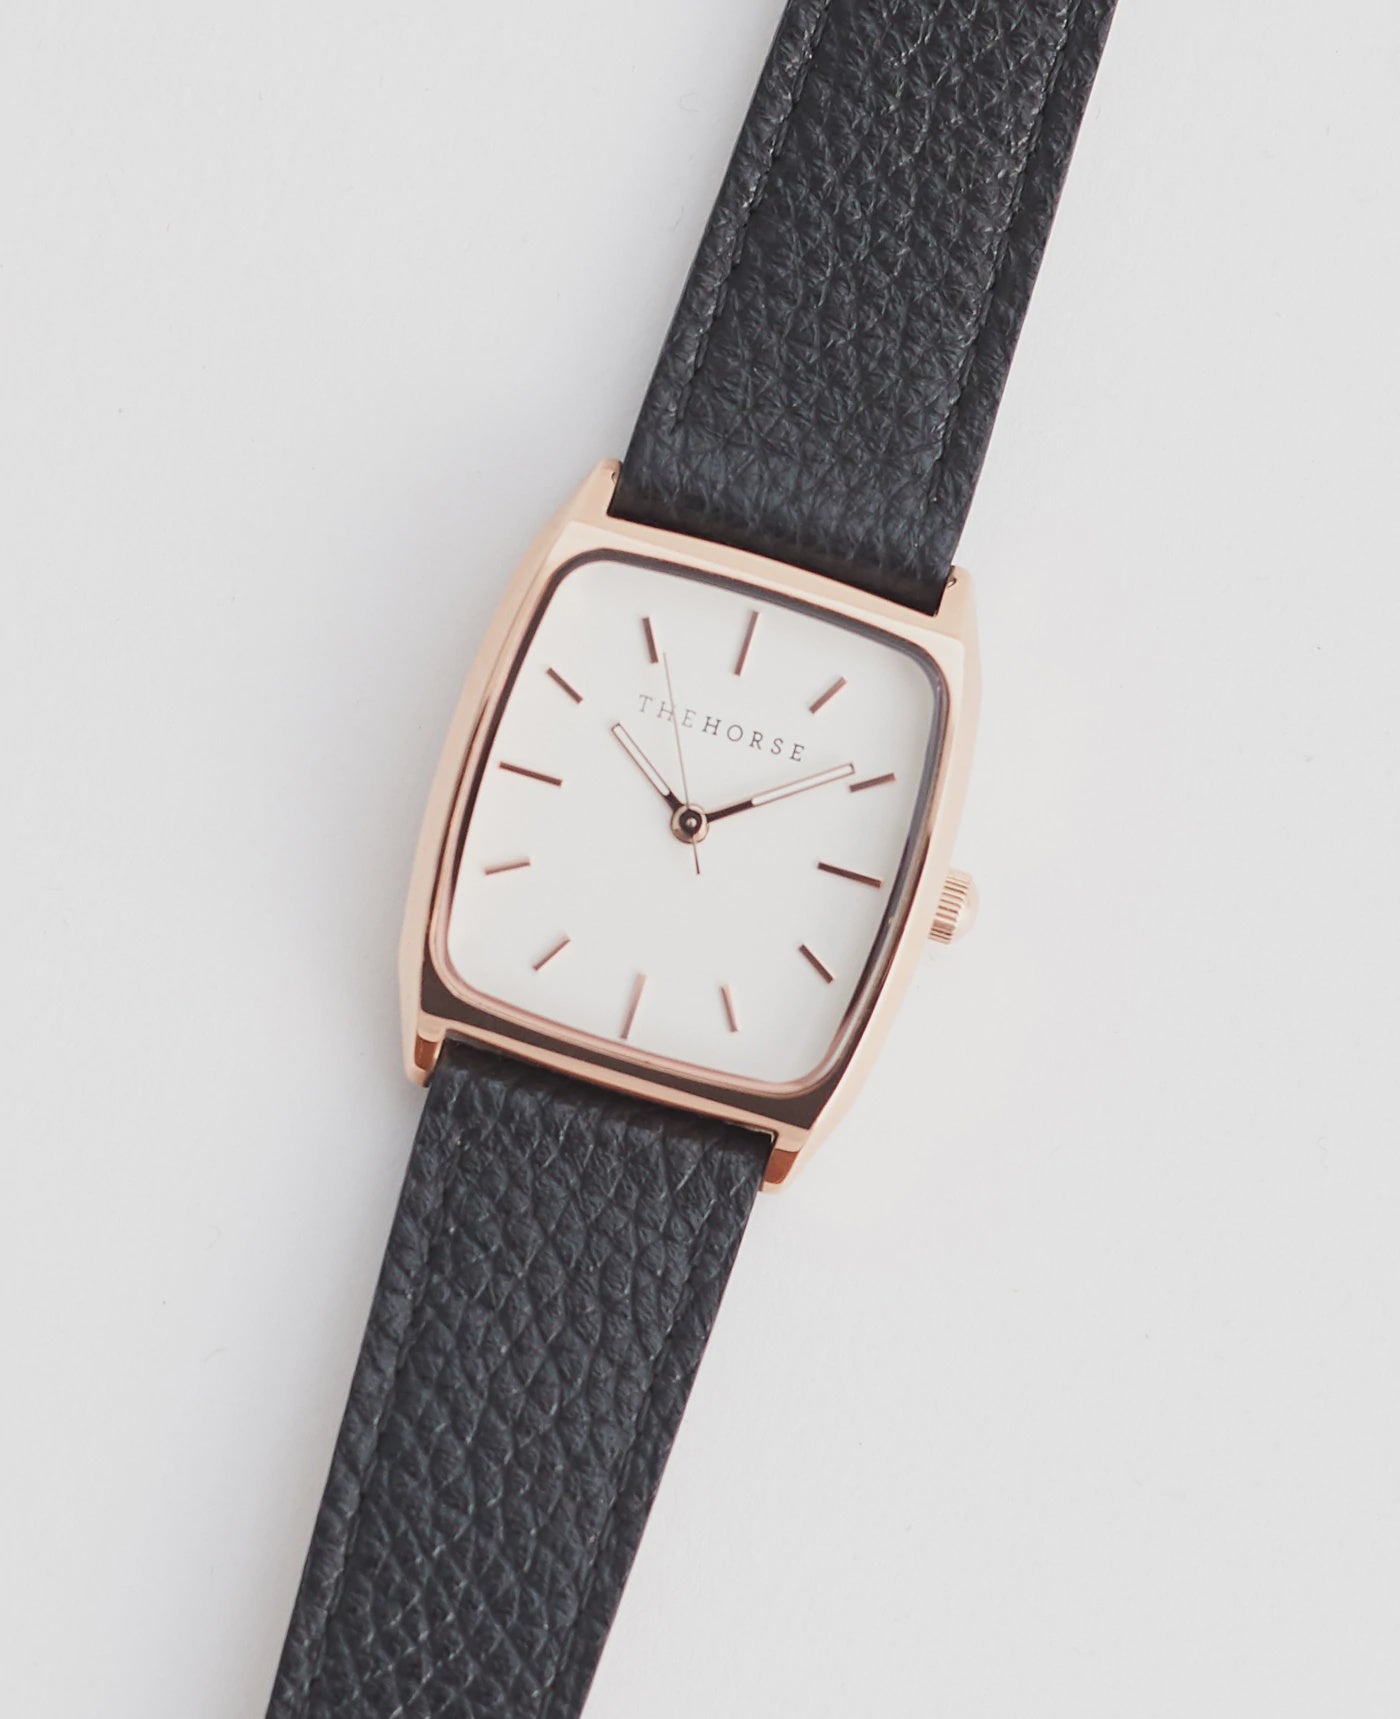 SK4 'The Dress Watch' in Rose Gold, White Dial & Black Leather